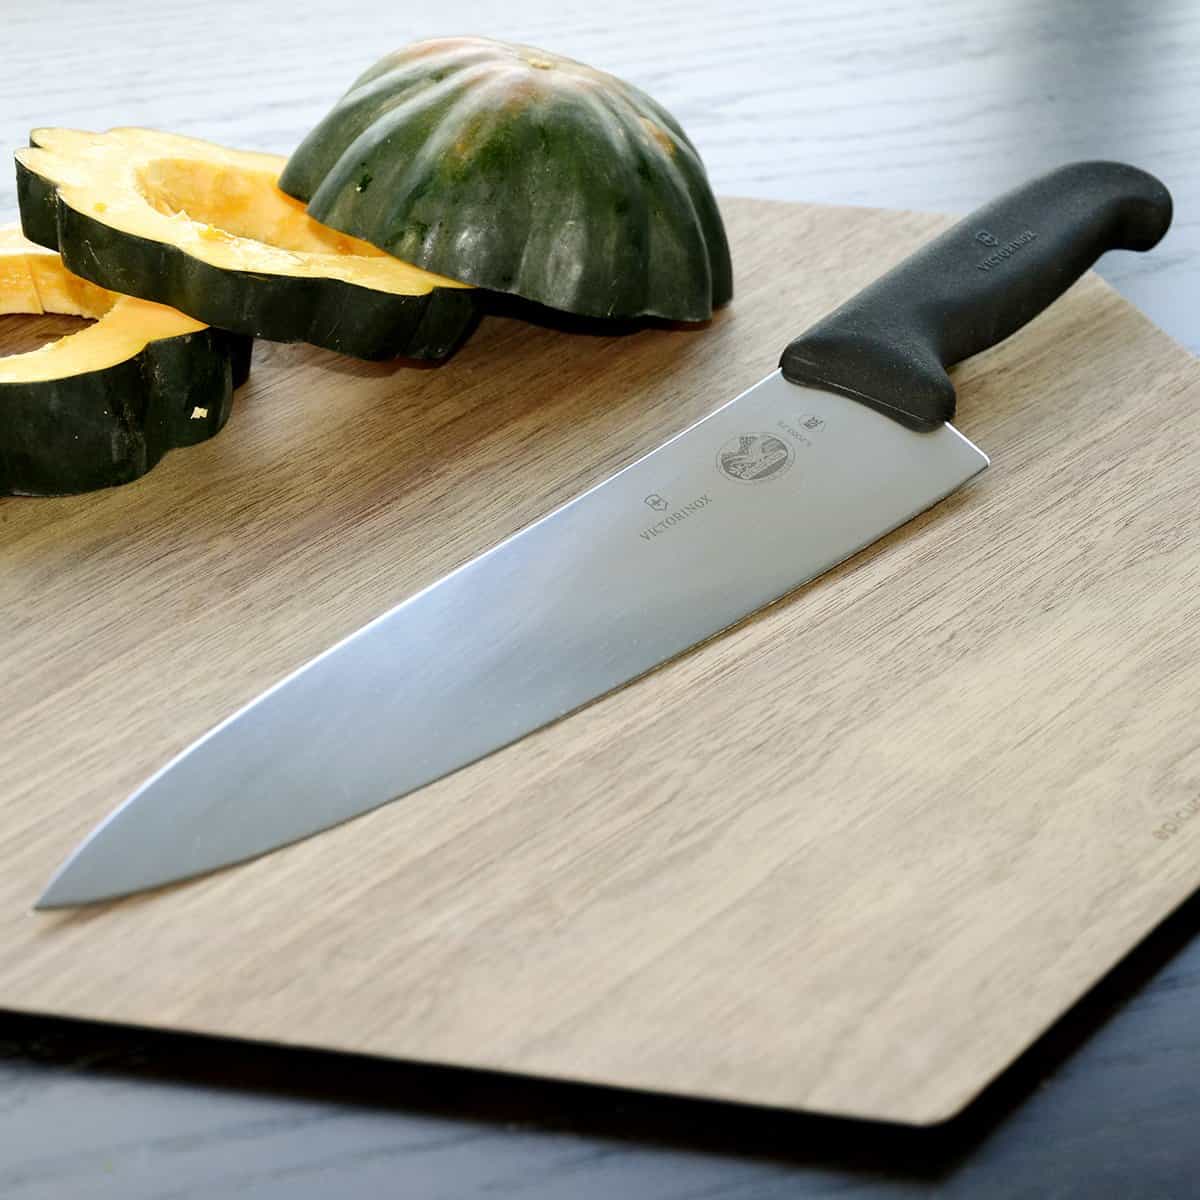 The Victorinox 10-inch Fibrox Pro Chef’s Knife for bbqing